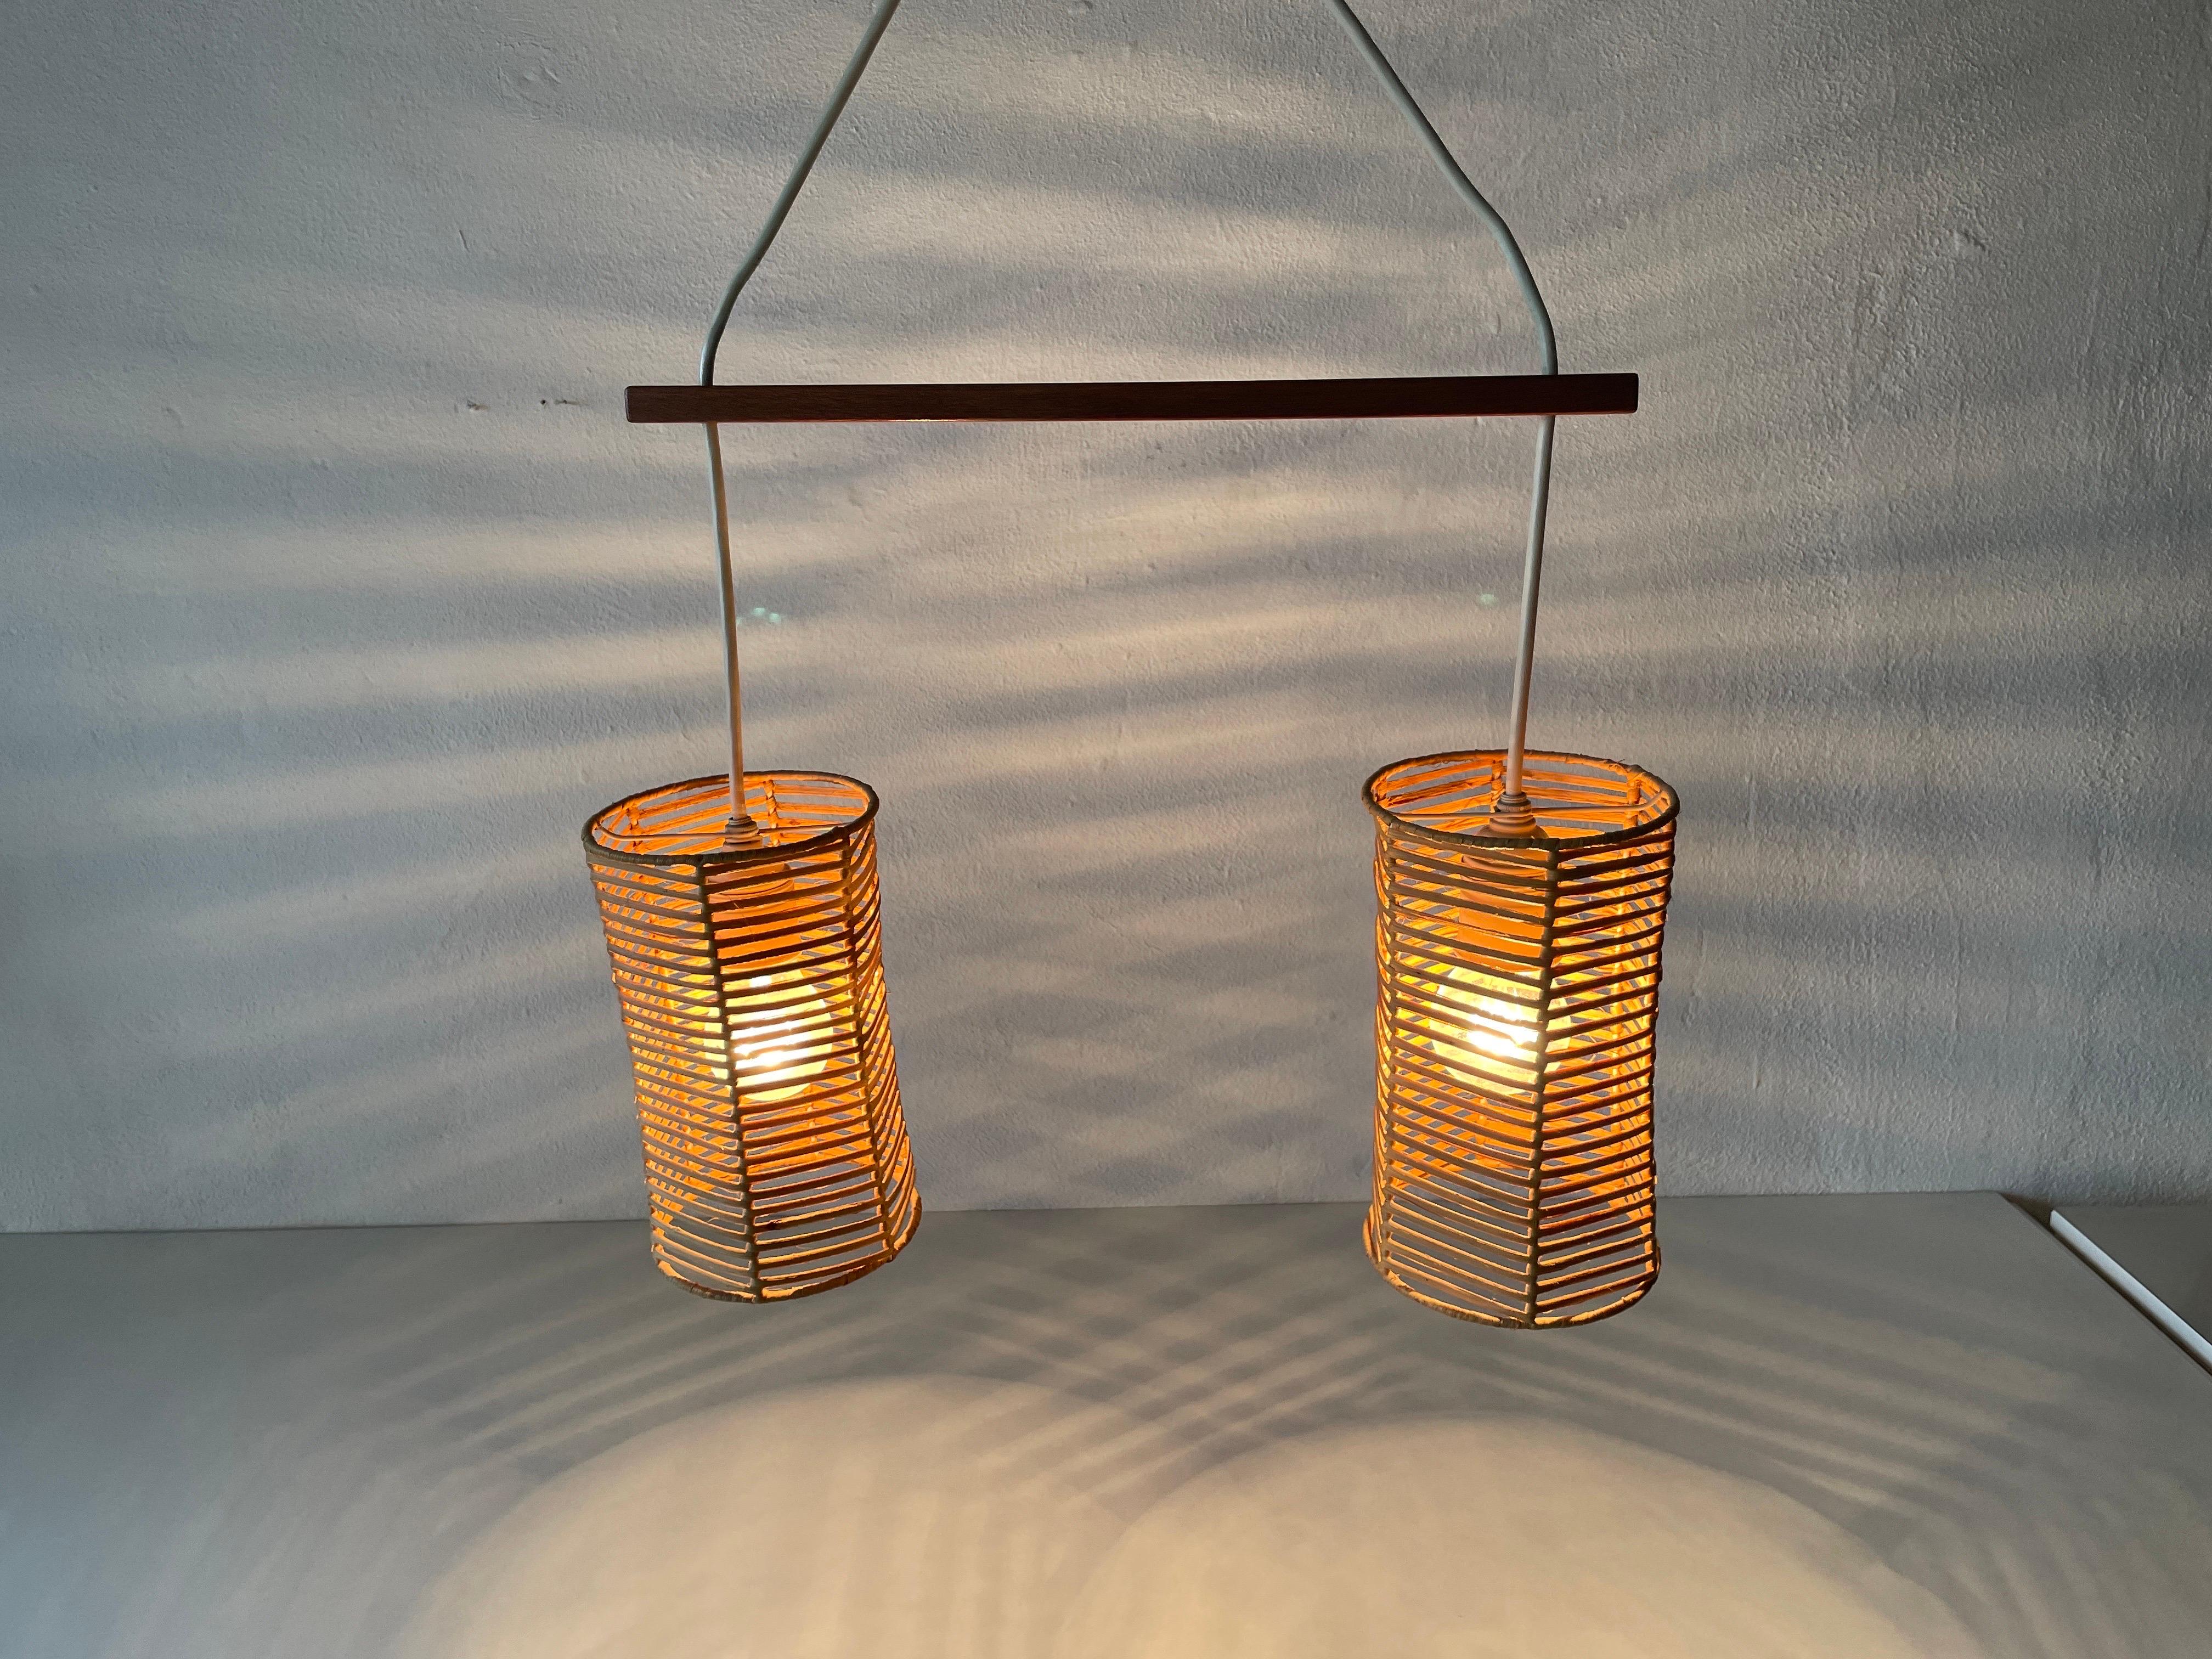 Double Shade Wicker and Wood Pendant Lamp, 1960s, Germany For Sale 2